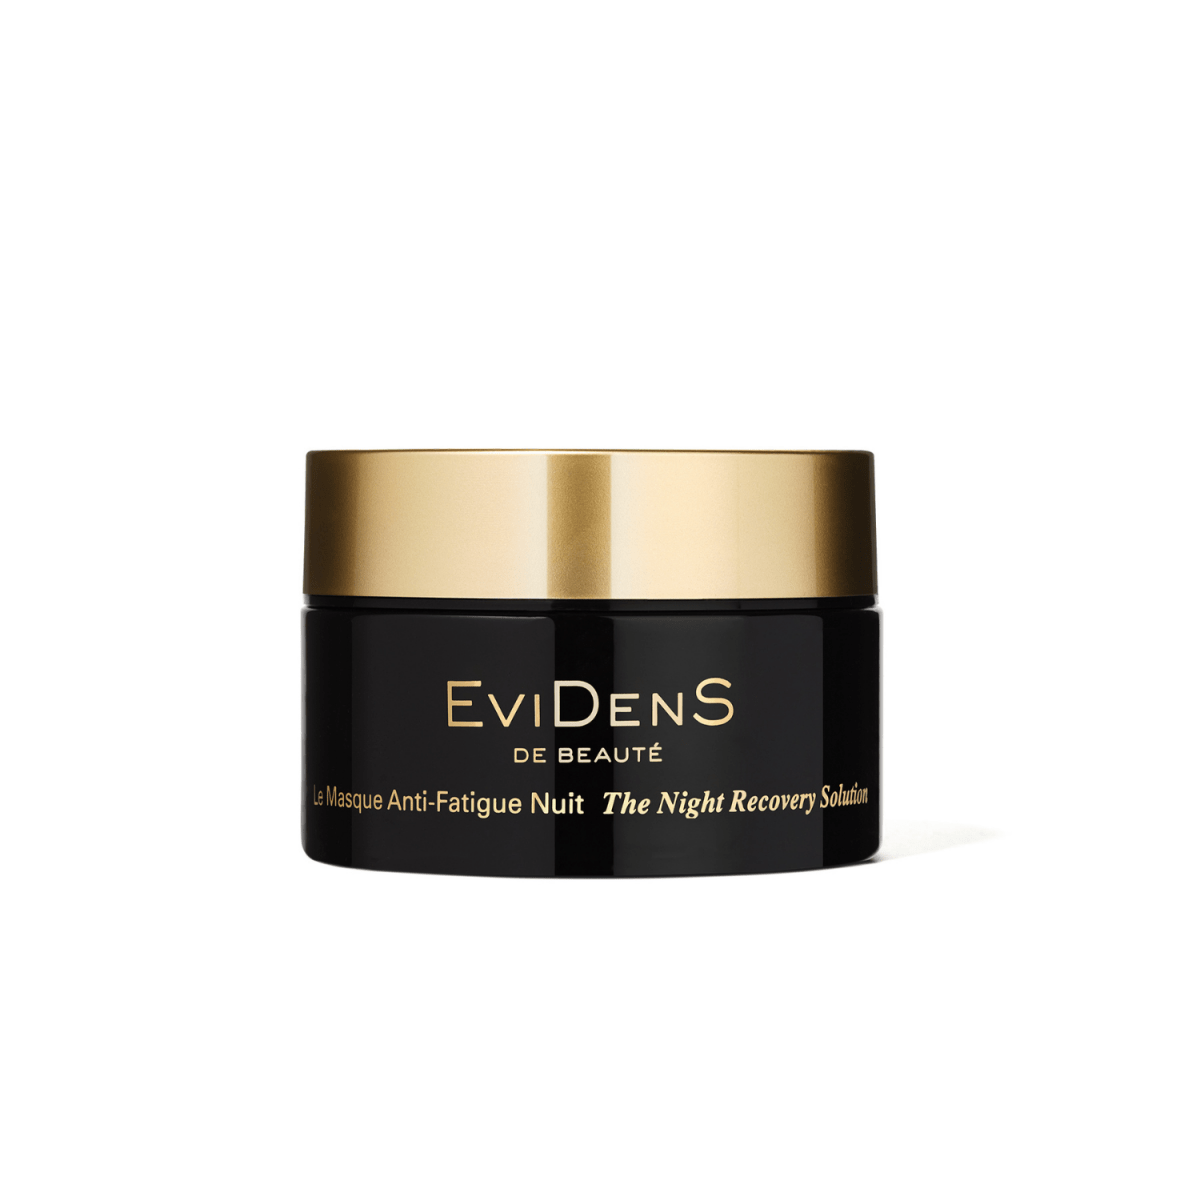 The Night Recovery Solution for overnight hydration|EviDenS de Beauté